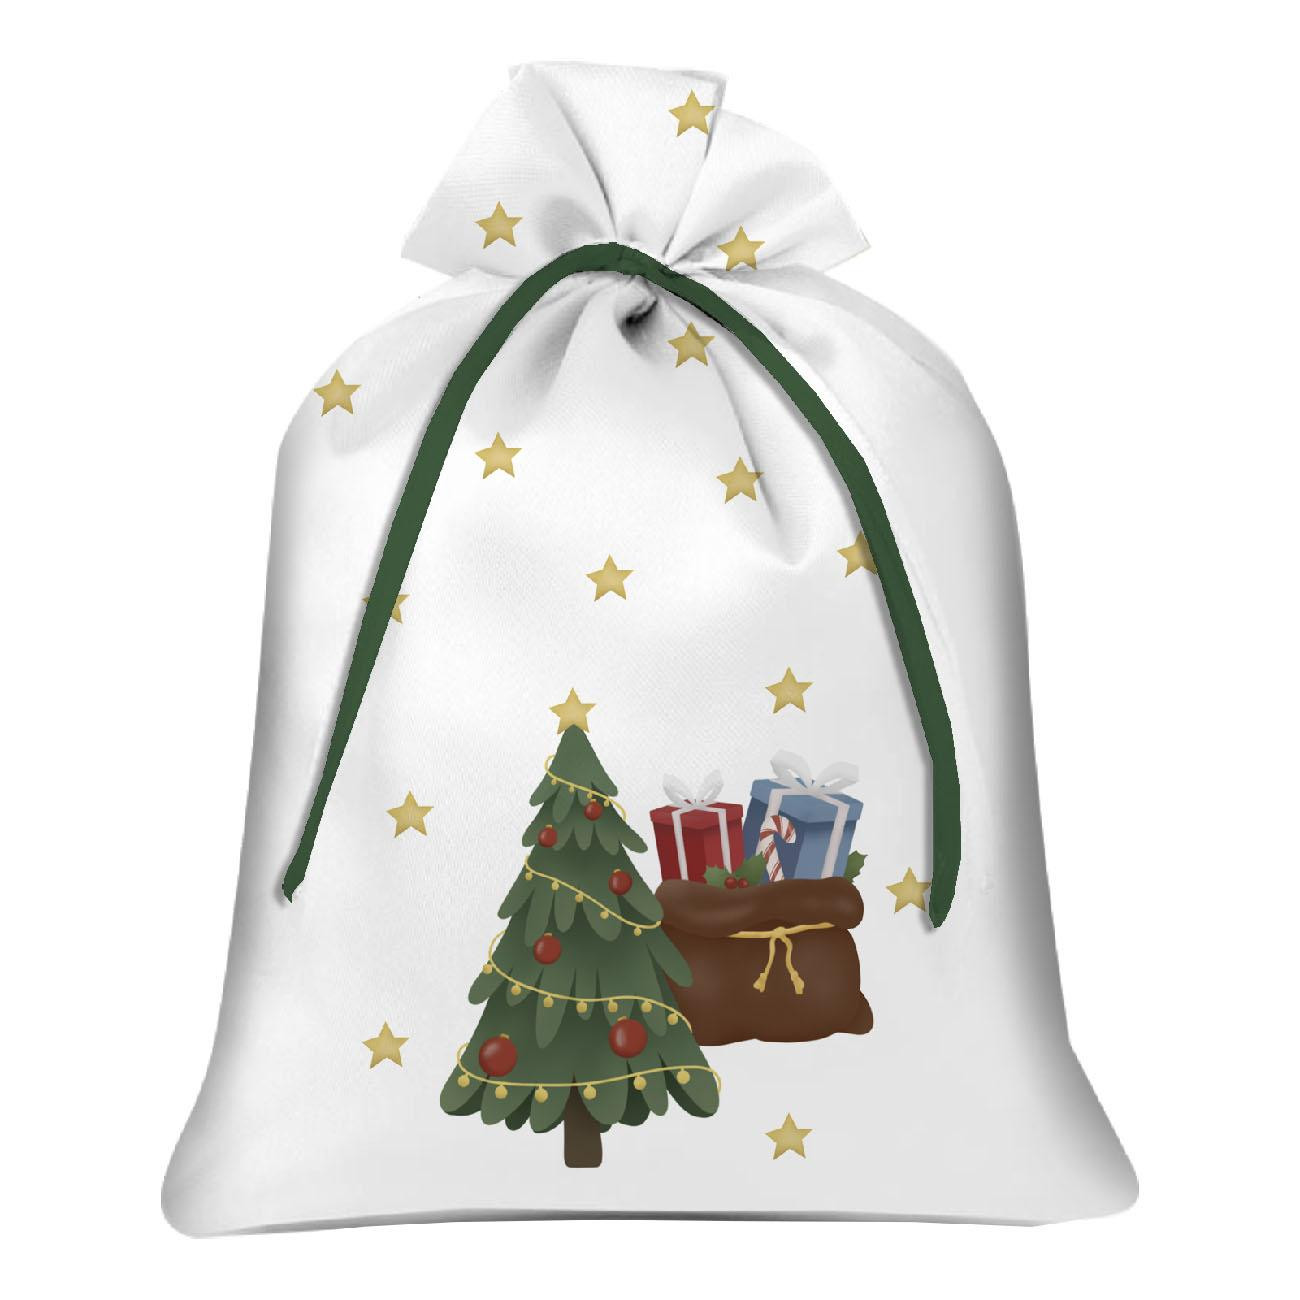 Gift pouches - SANTAS WITH A BAGS OF PRESENTS (IN THE SANTA CLAUS FOREST) - sewing set